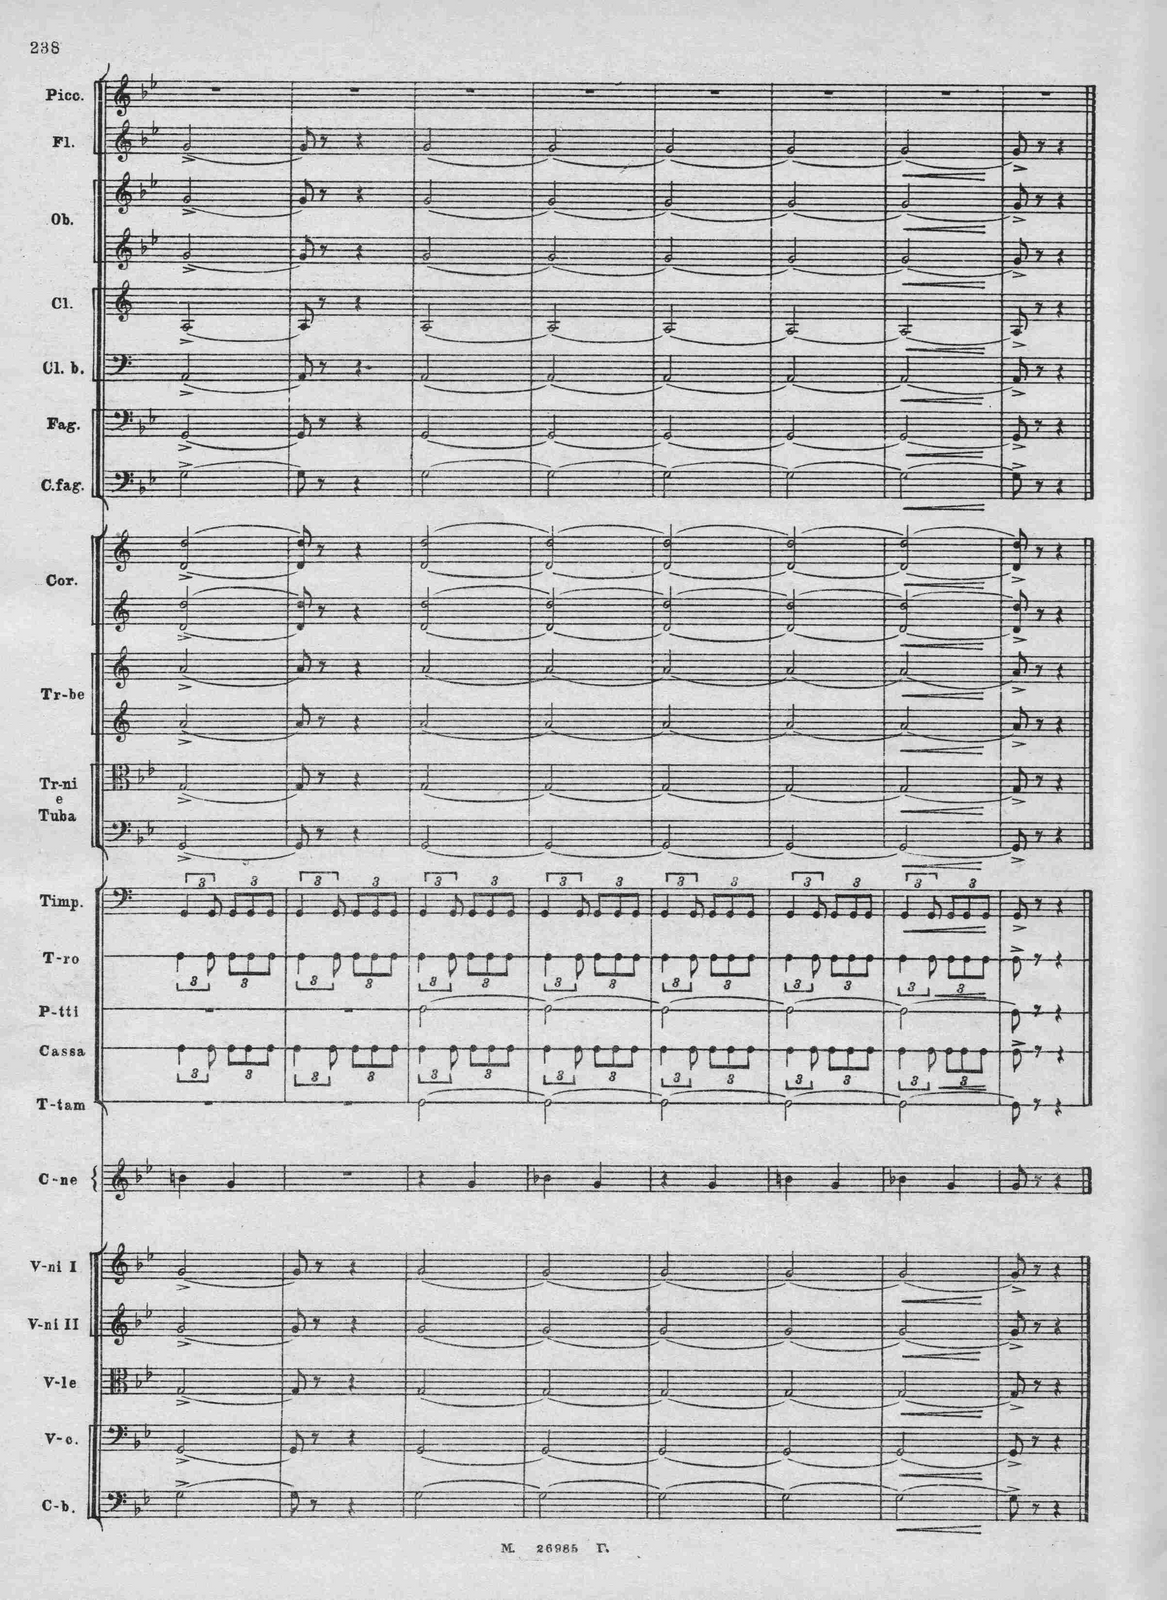 The final page of the score for Symphony No. 11